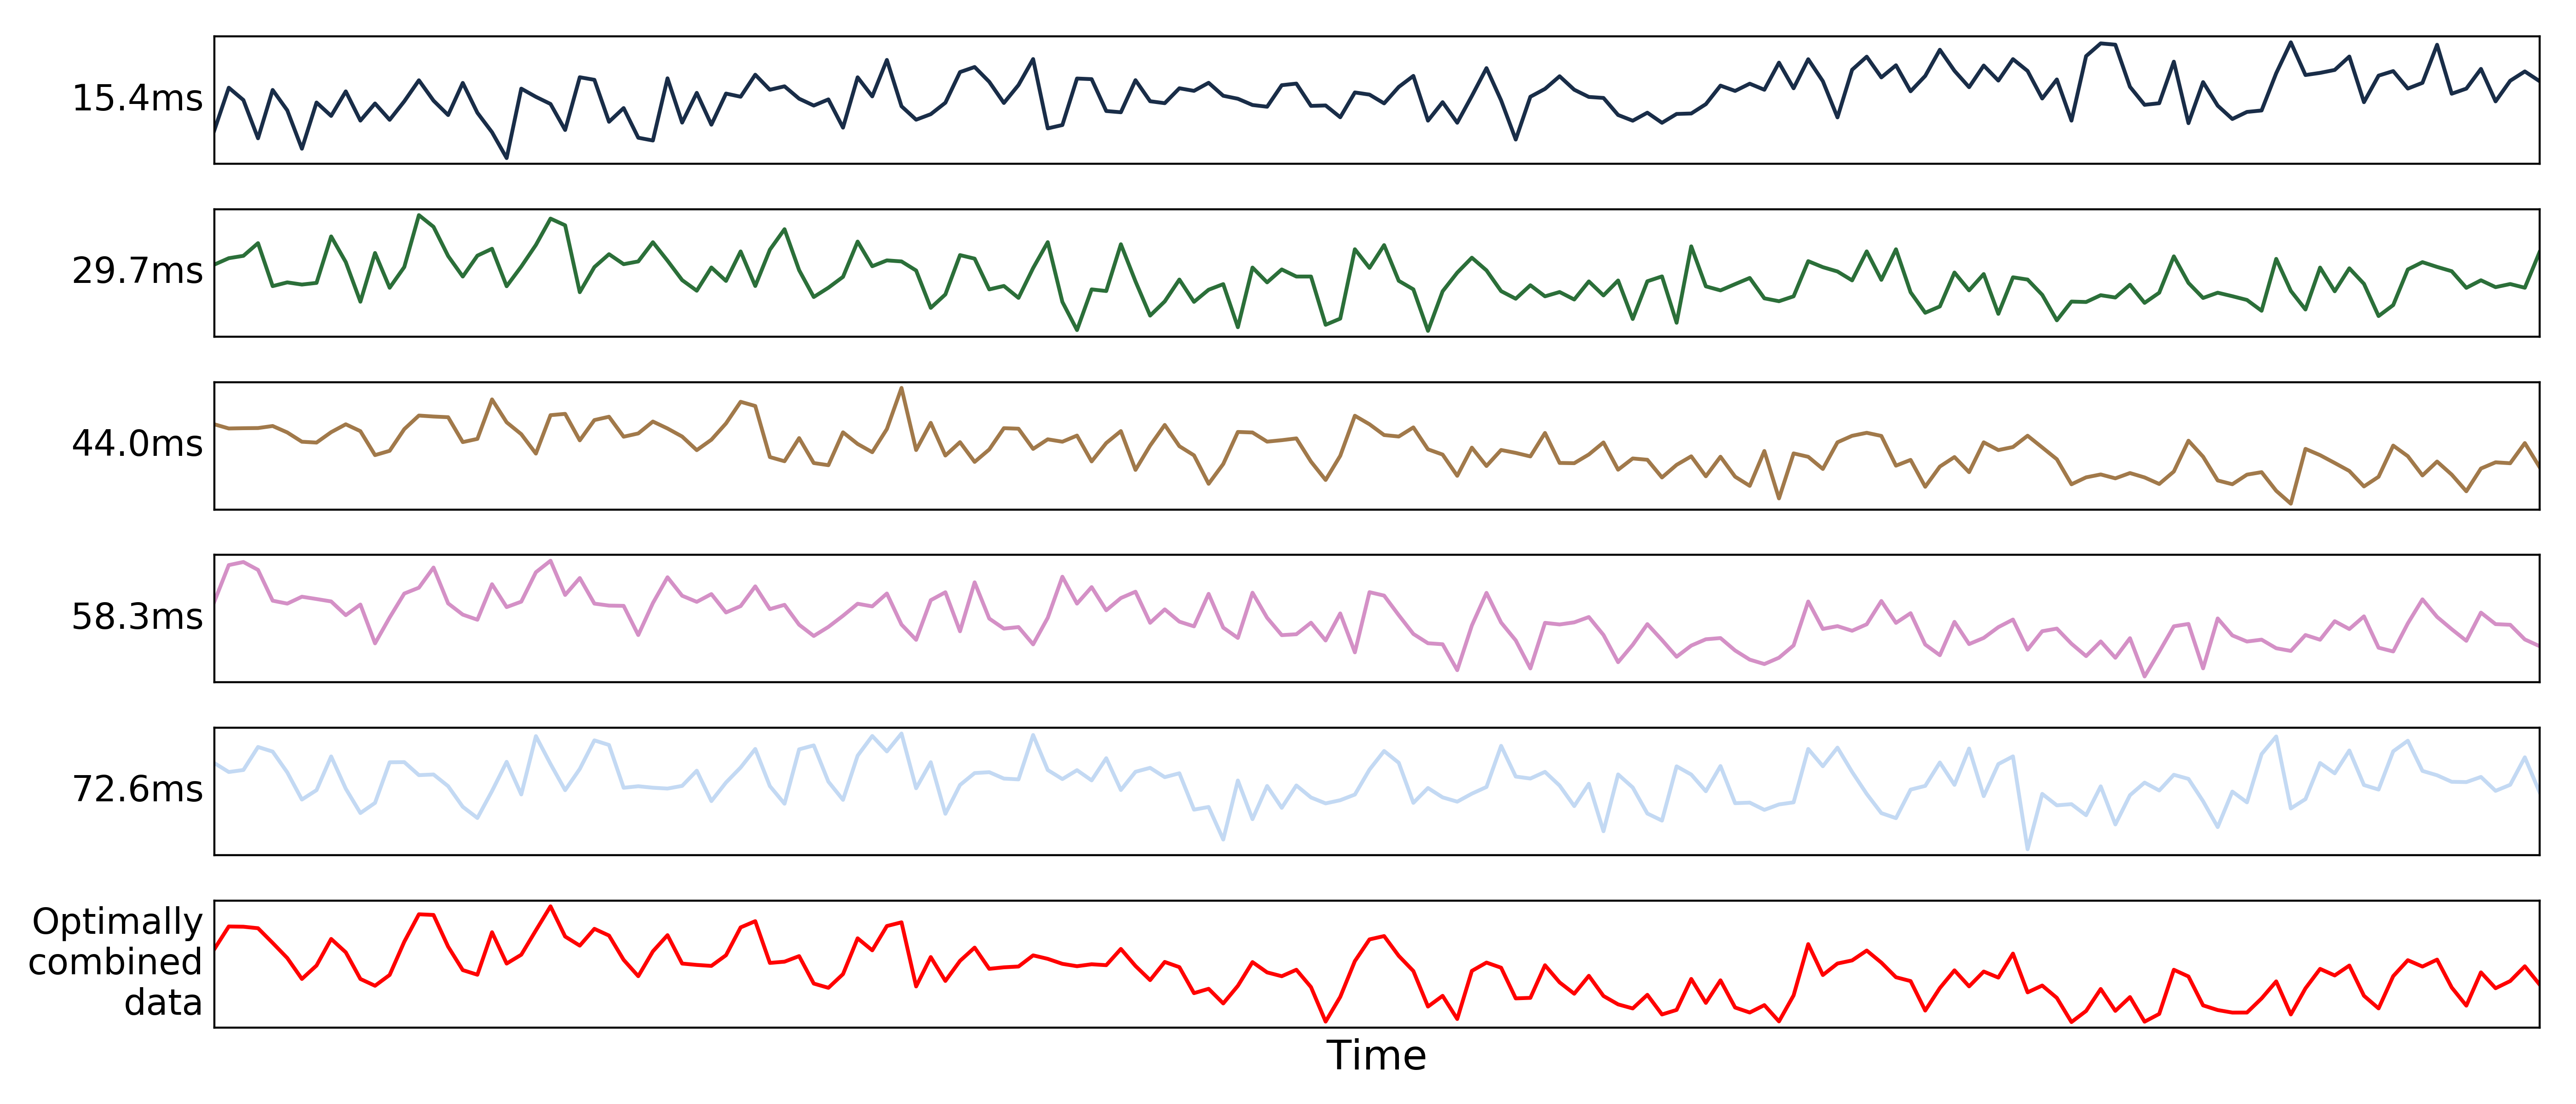 _images/10_optimal_combination_timeseries.png